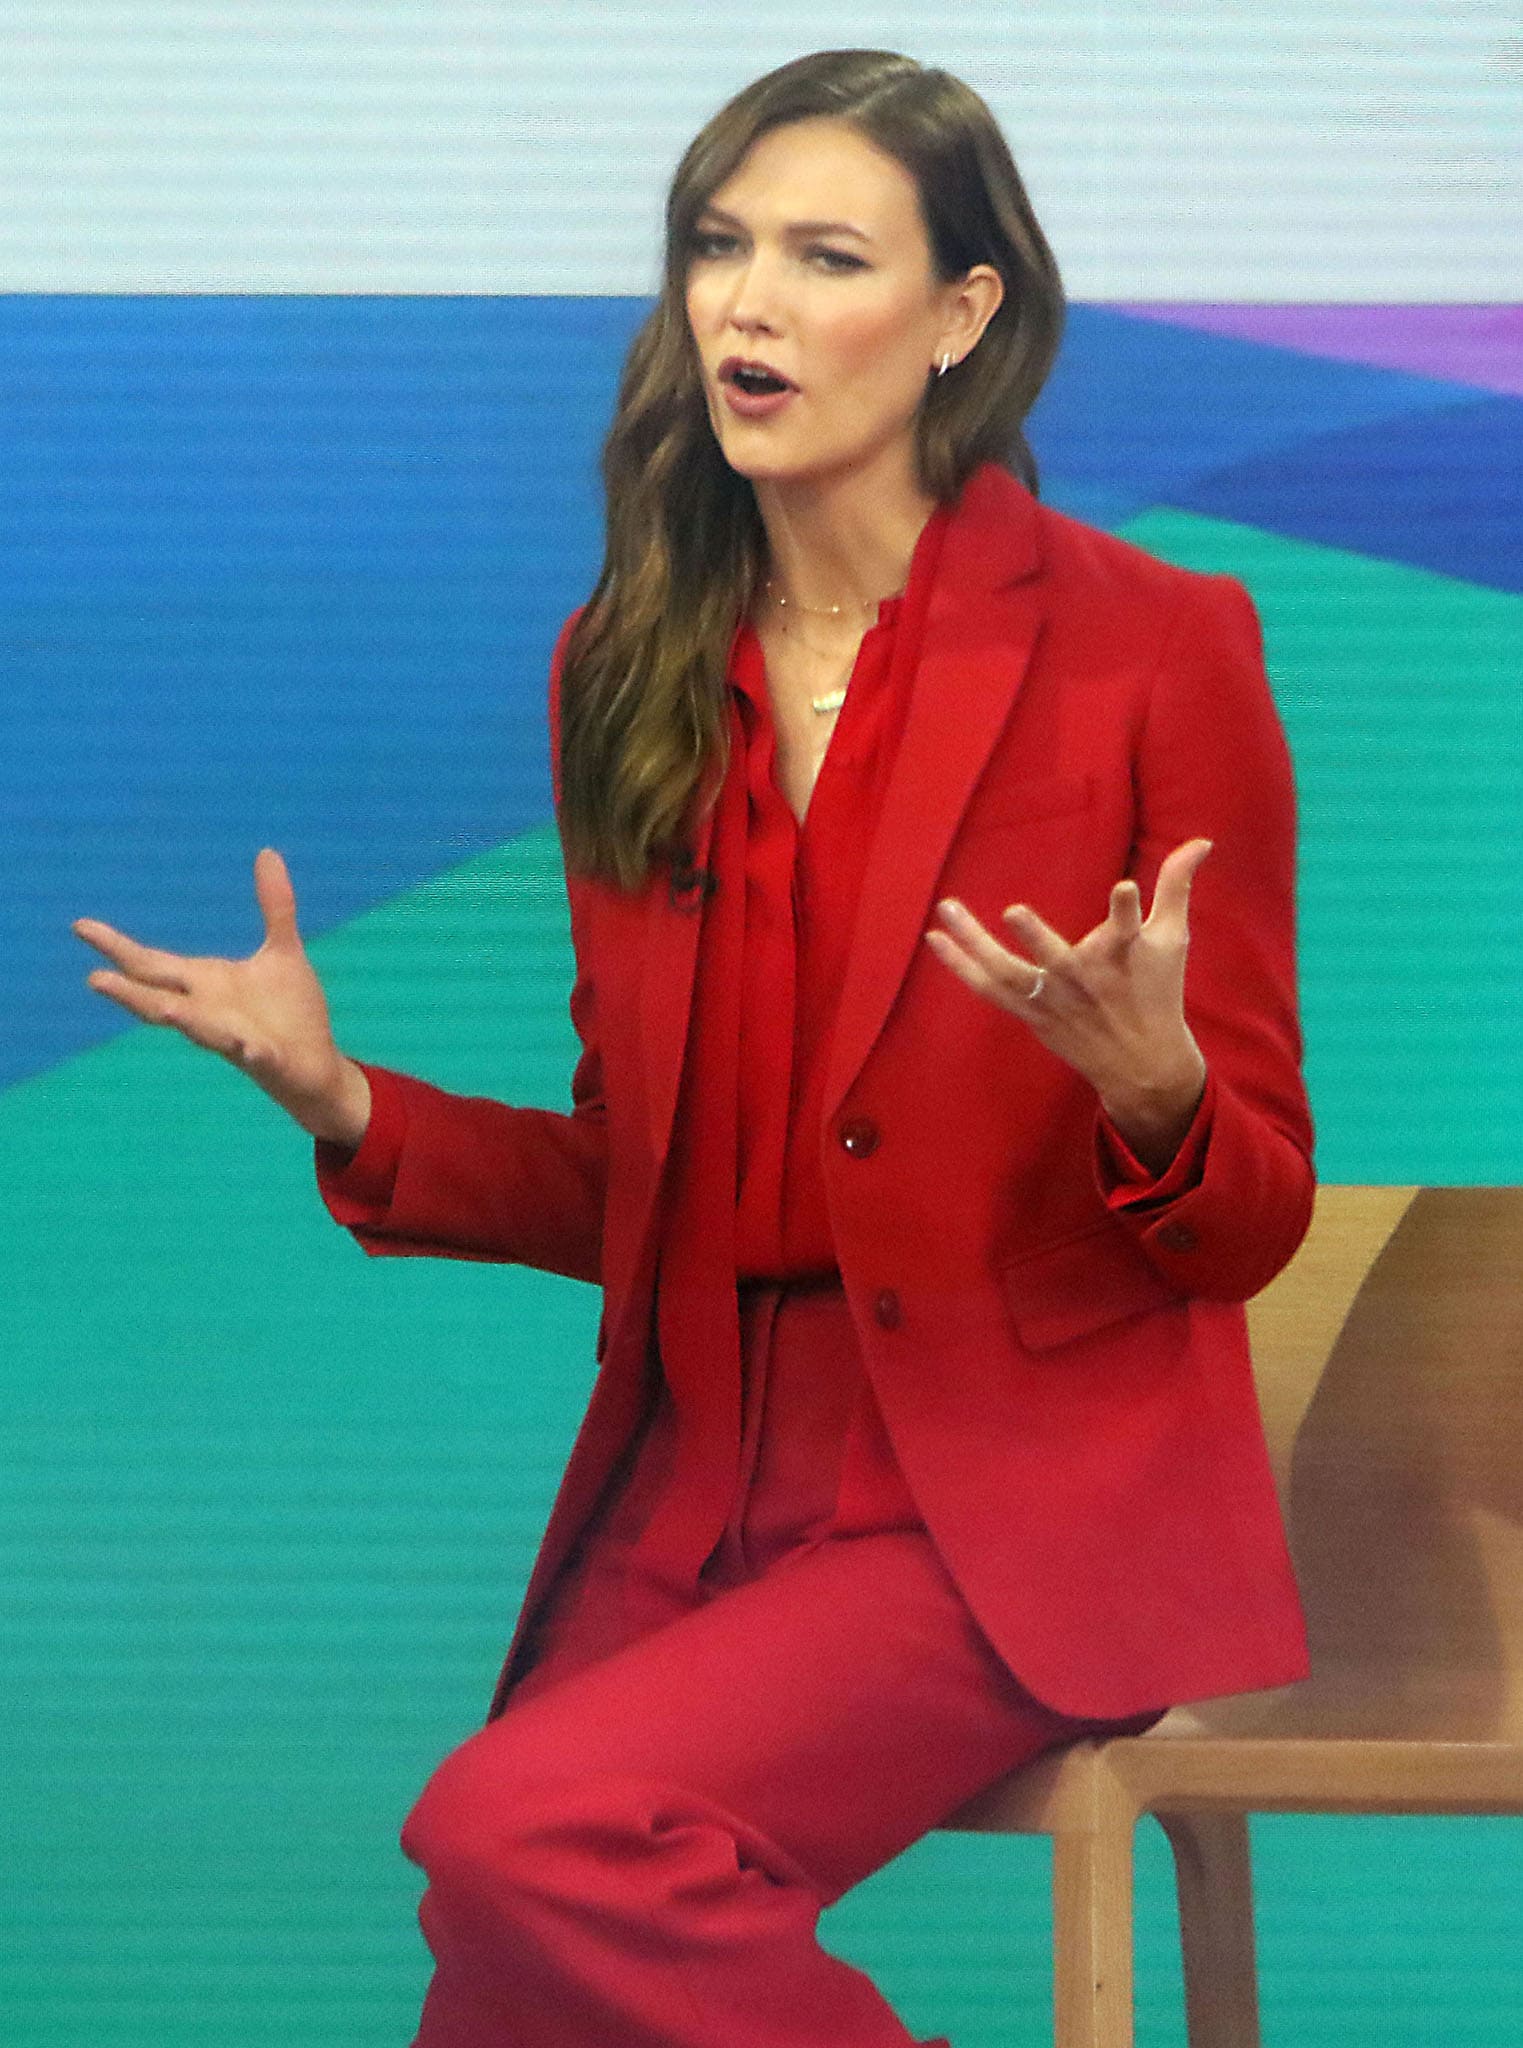 Karlie Kloss talks about motherhood and Kode with Klossy in Maison Valentino red suit on Today Show on April 6, 2022